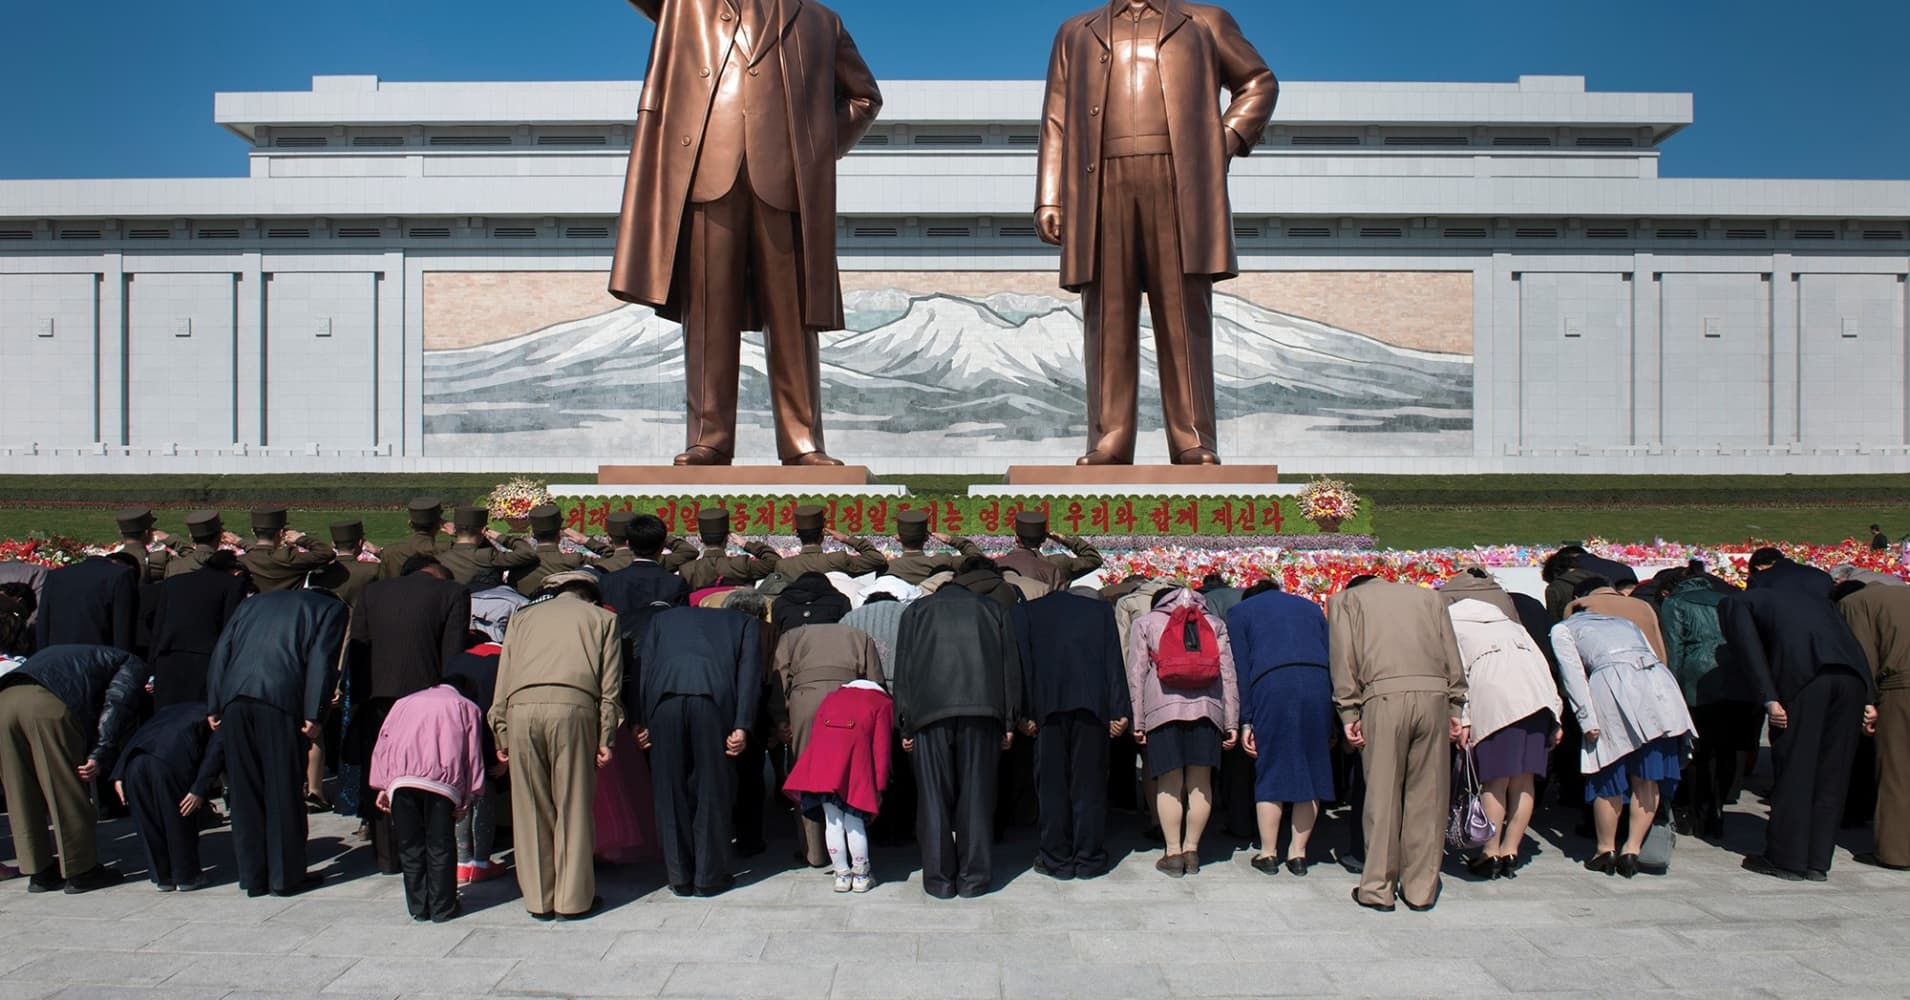 Can I Travel to North Korea? Number of Tourists Crossing From China Expected to Peak